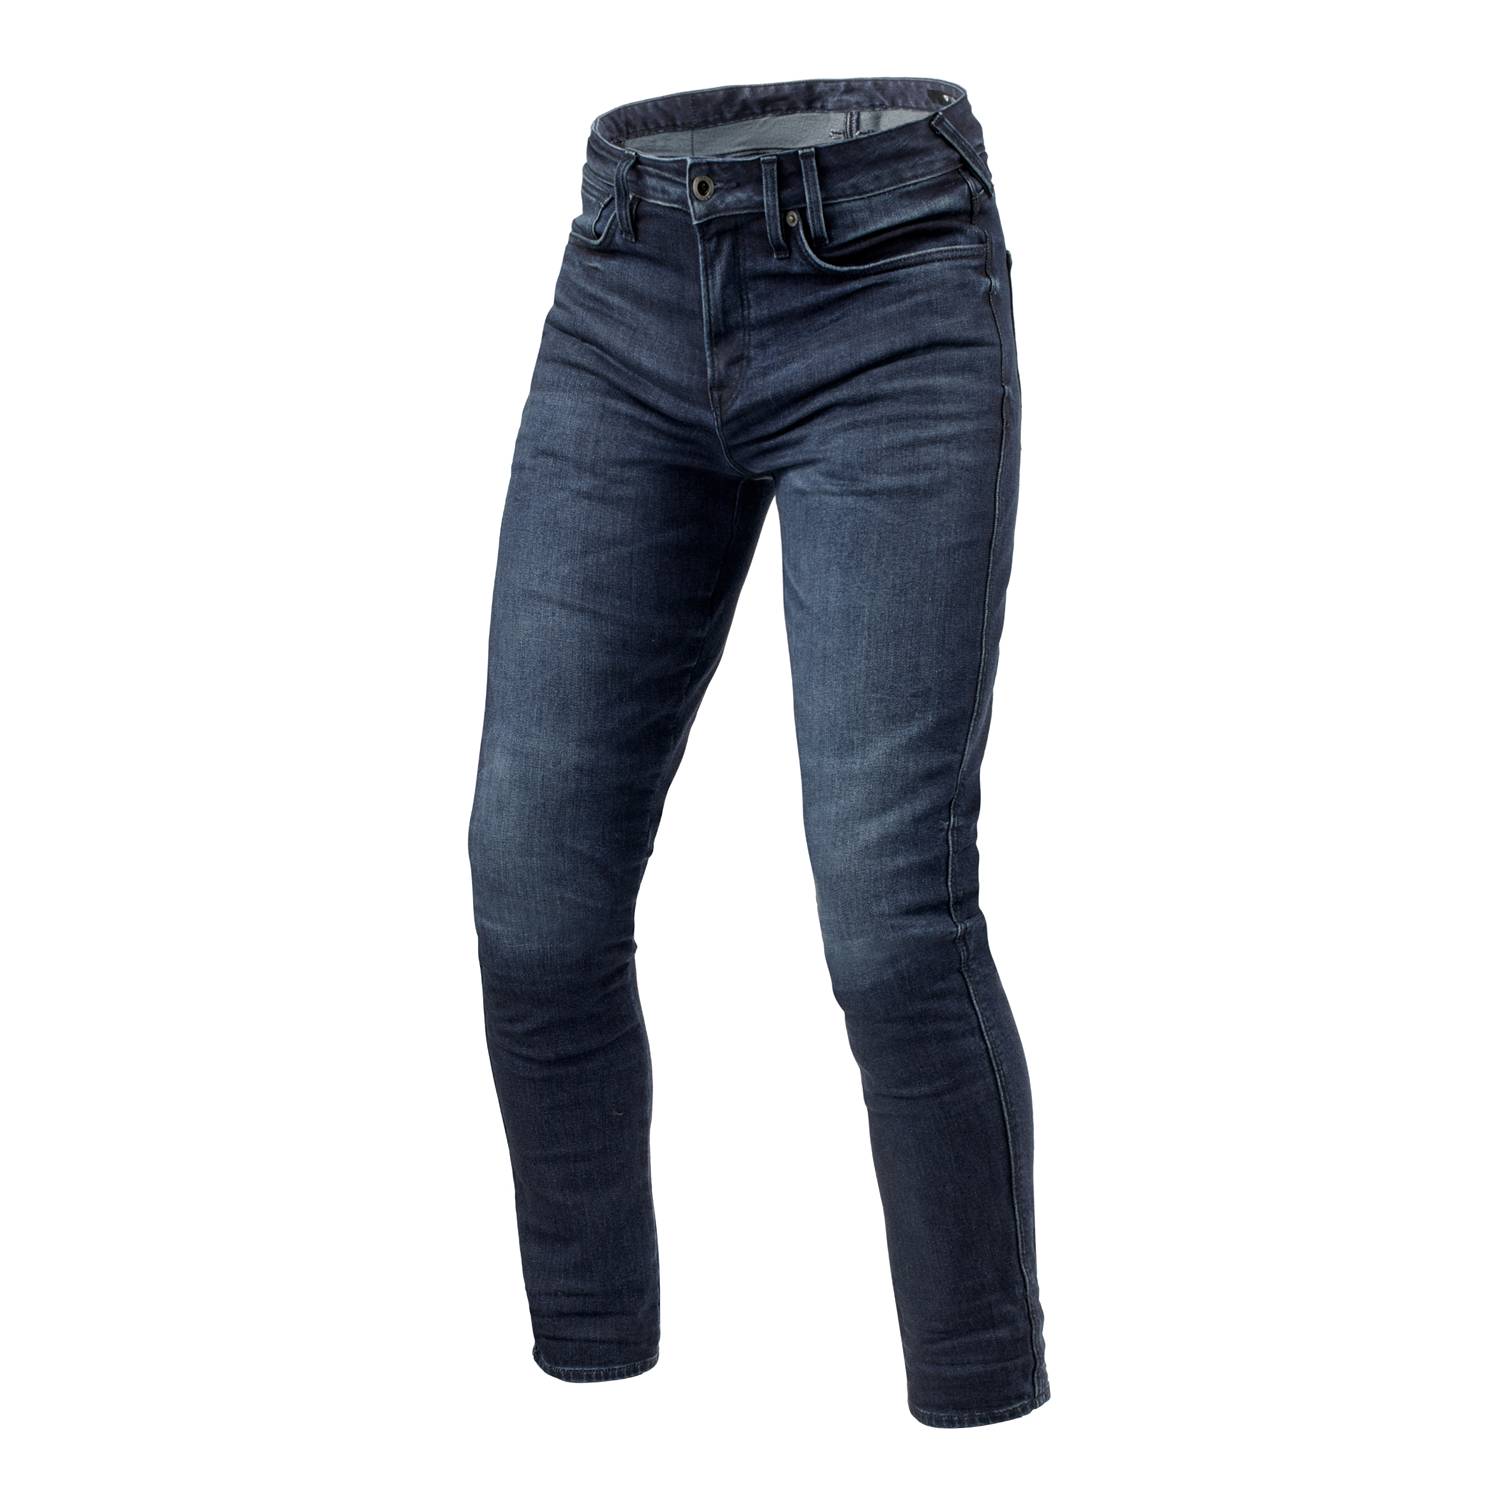 Image of EU REV'IT! Jeans Carlin SK Dark Blue Used L32 Motorcycle Jeans Taille L32/W28